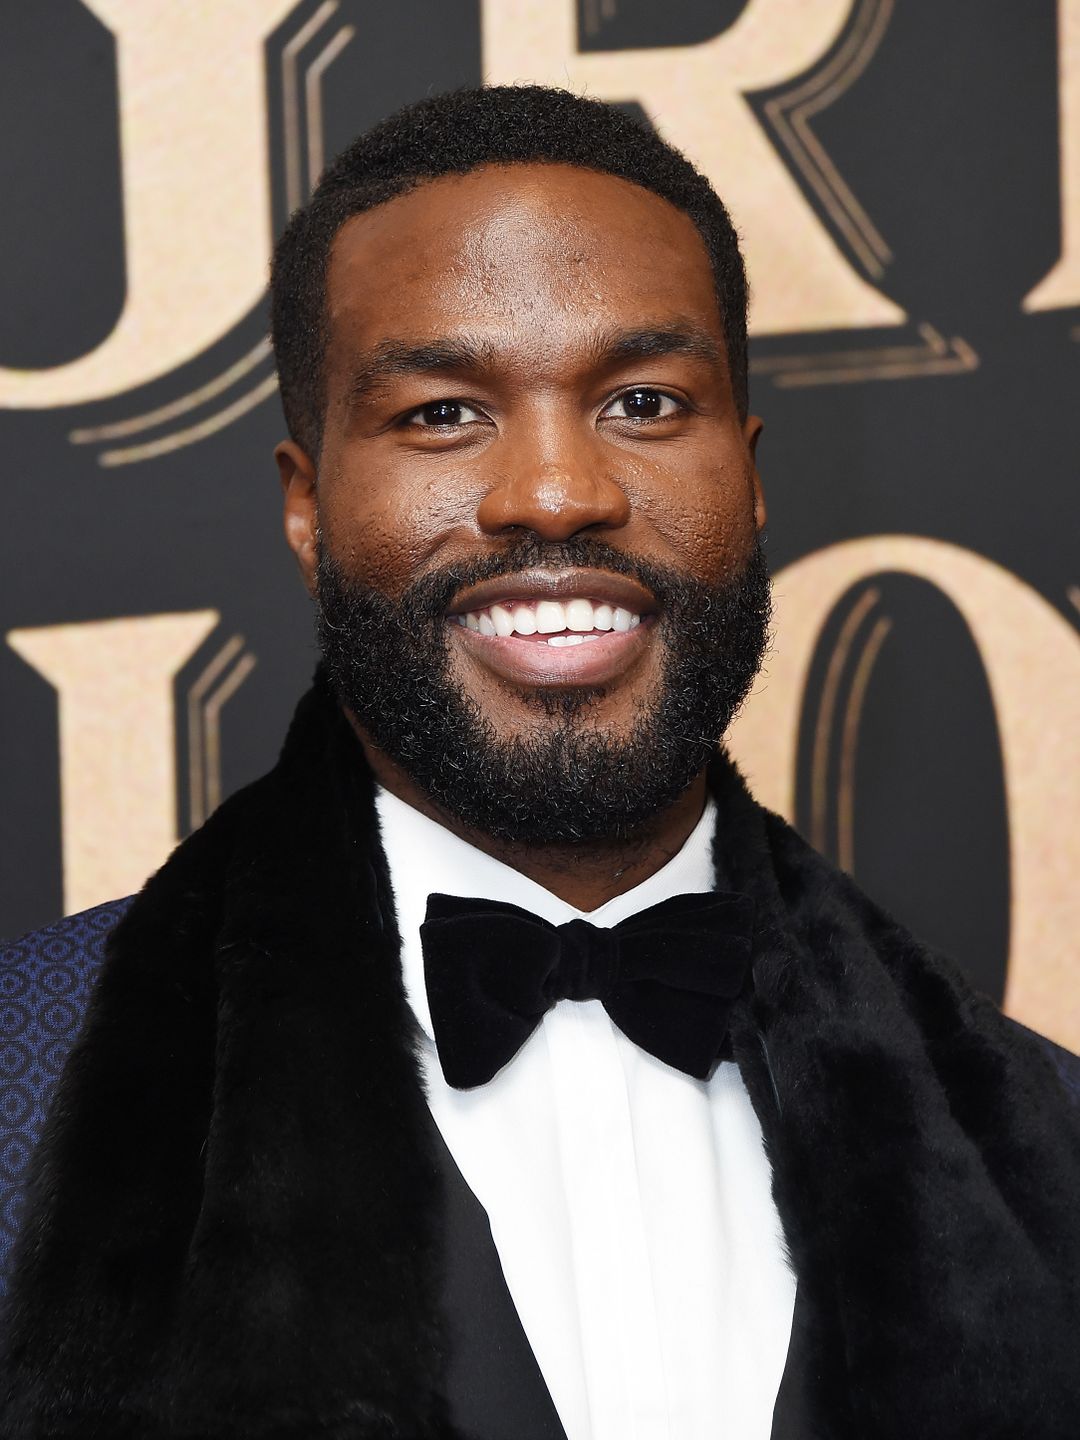 Yahya Abdul-Mateen II does he have a wife